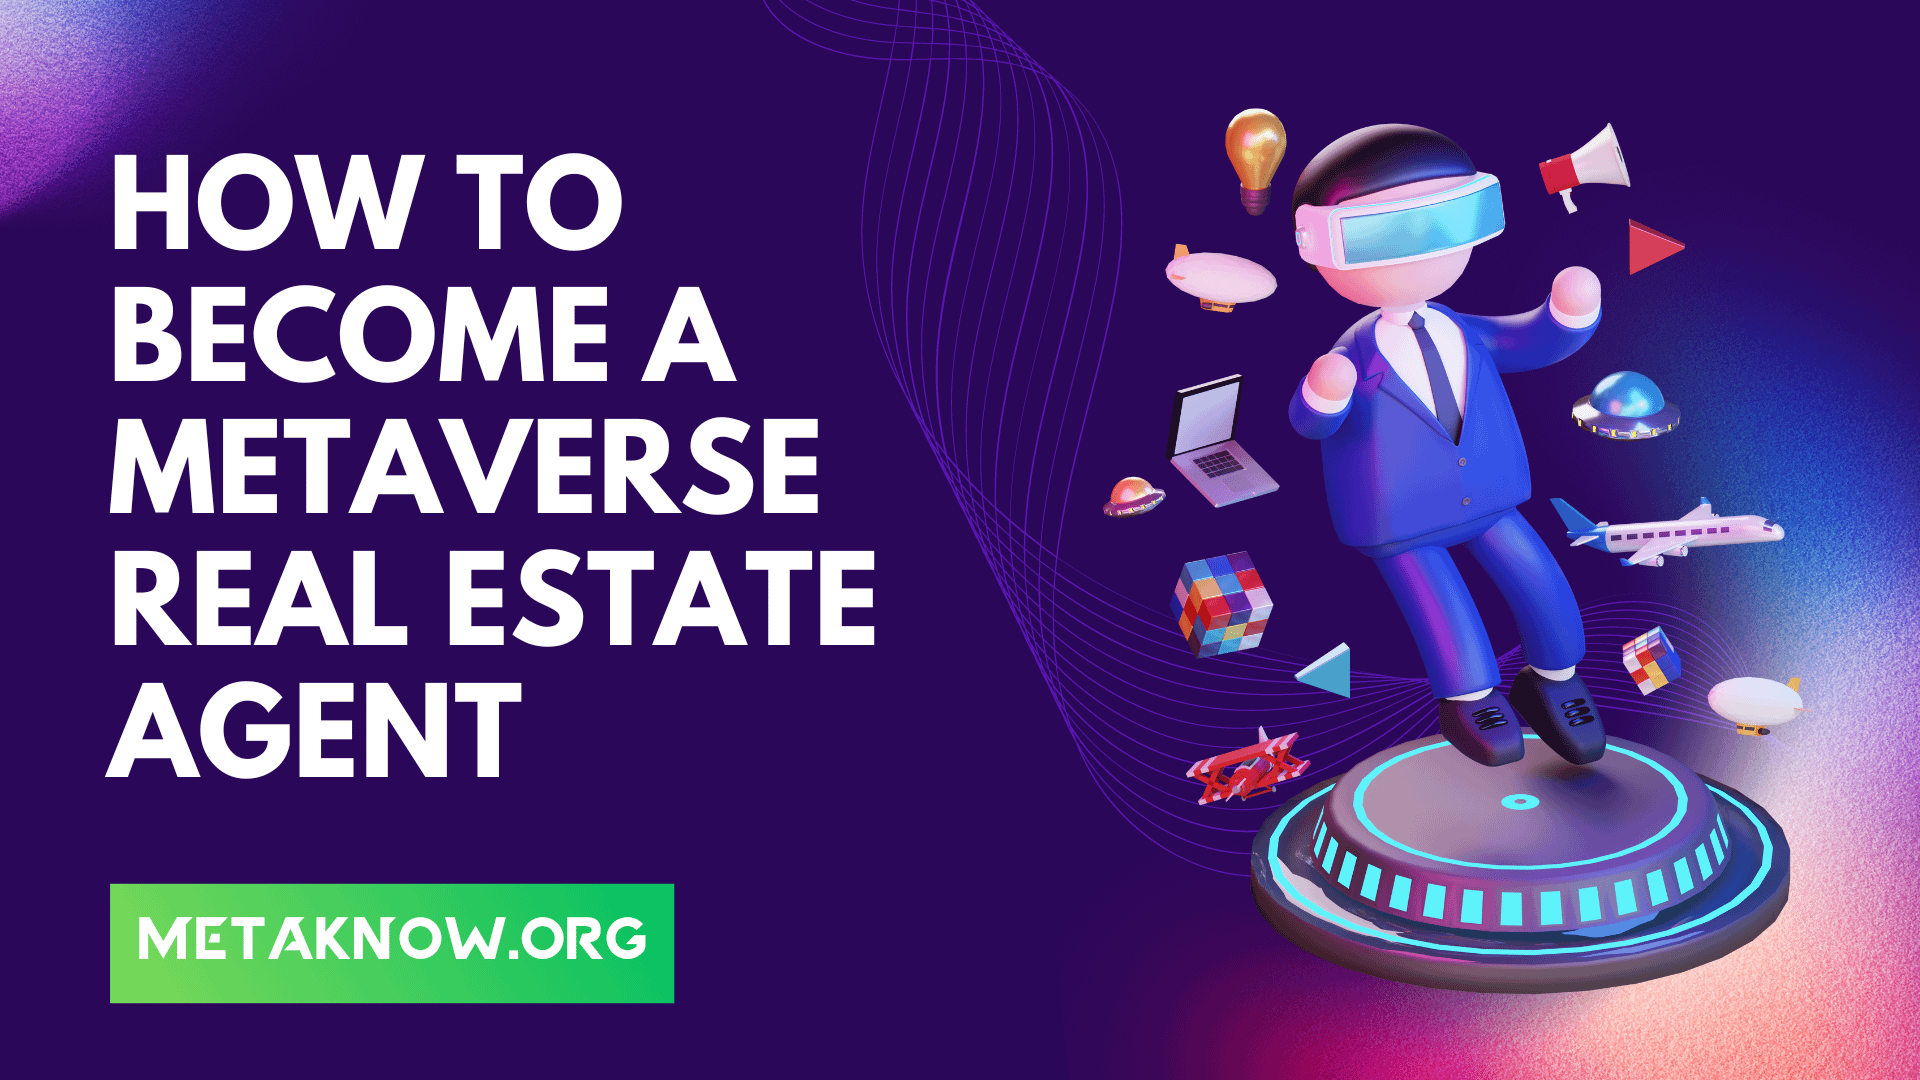 How to Become a Metaverse Real Estate Agent